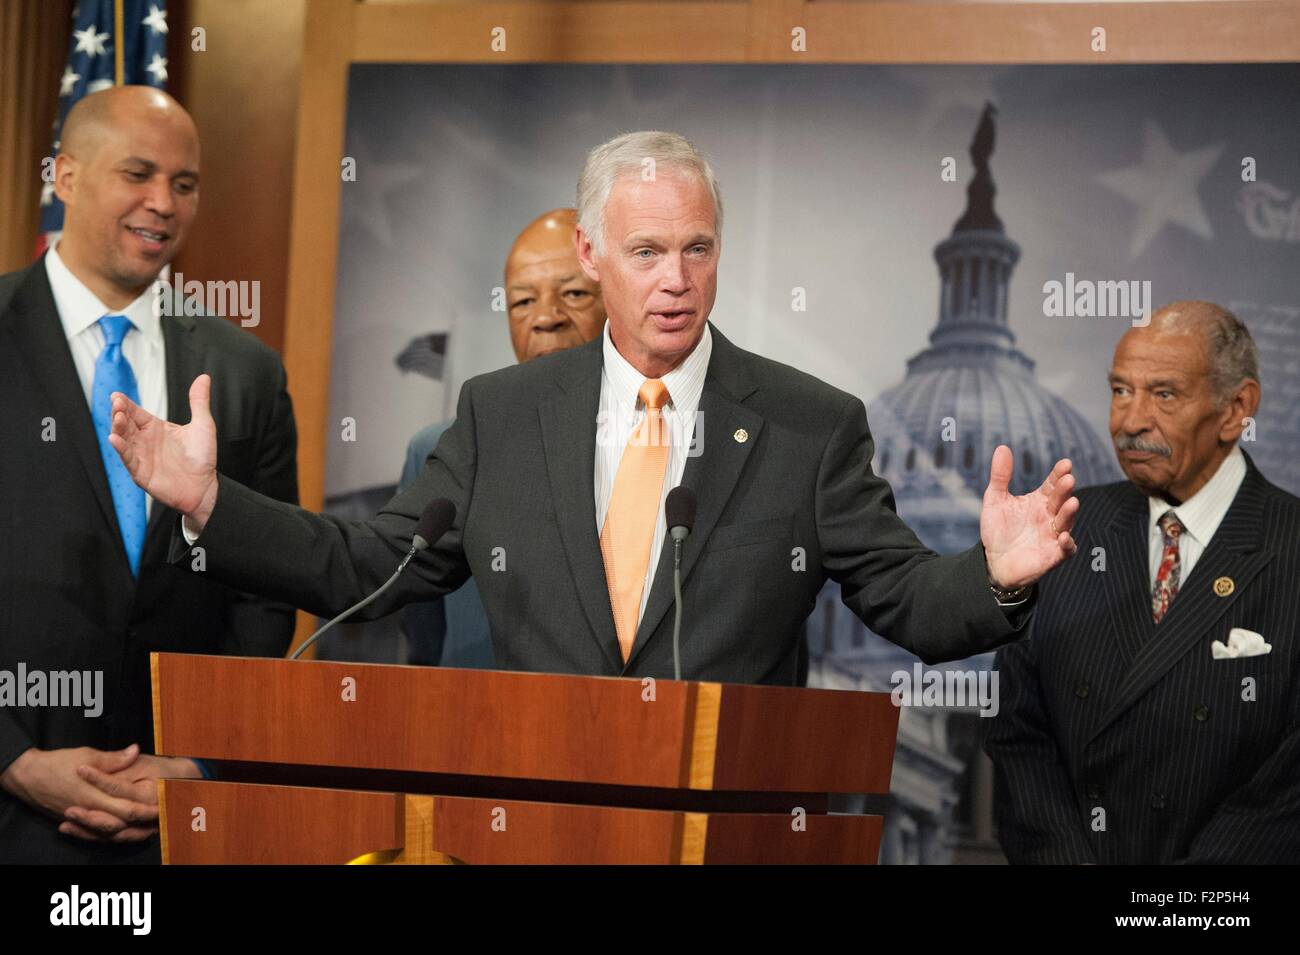 U.S. Senator Ron Johnson joins other members of Congress during a press conference introducing the bipartisan, bicameral Fair Chance Act on Capitol Hill September 10, 2015 in Washington, DC. Stock Photo